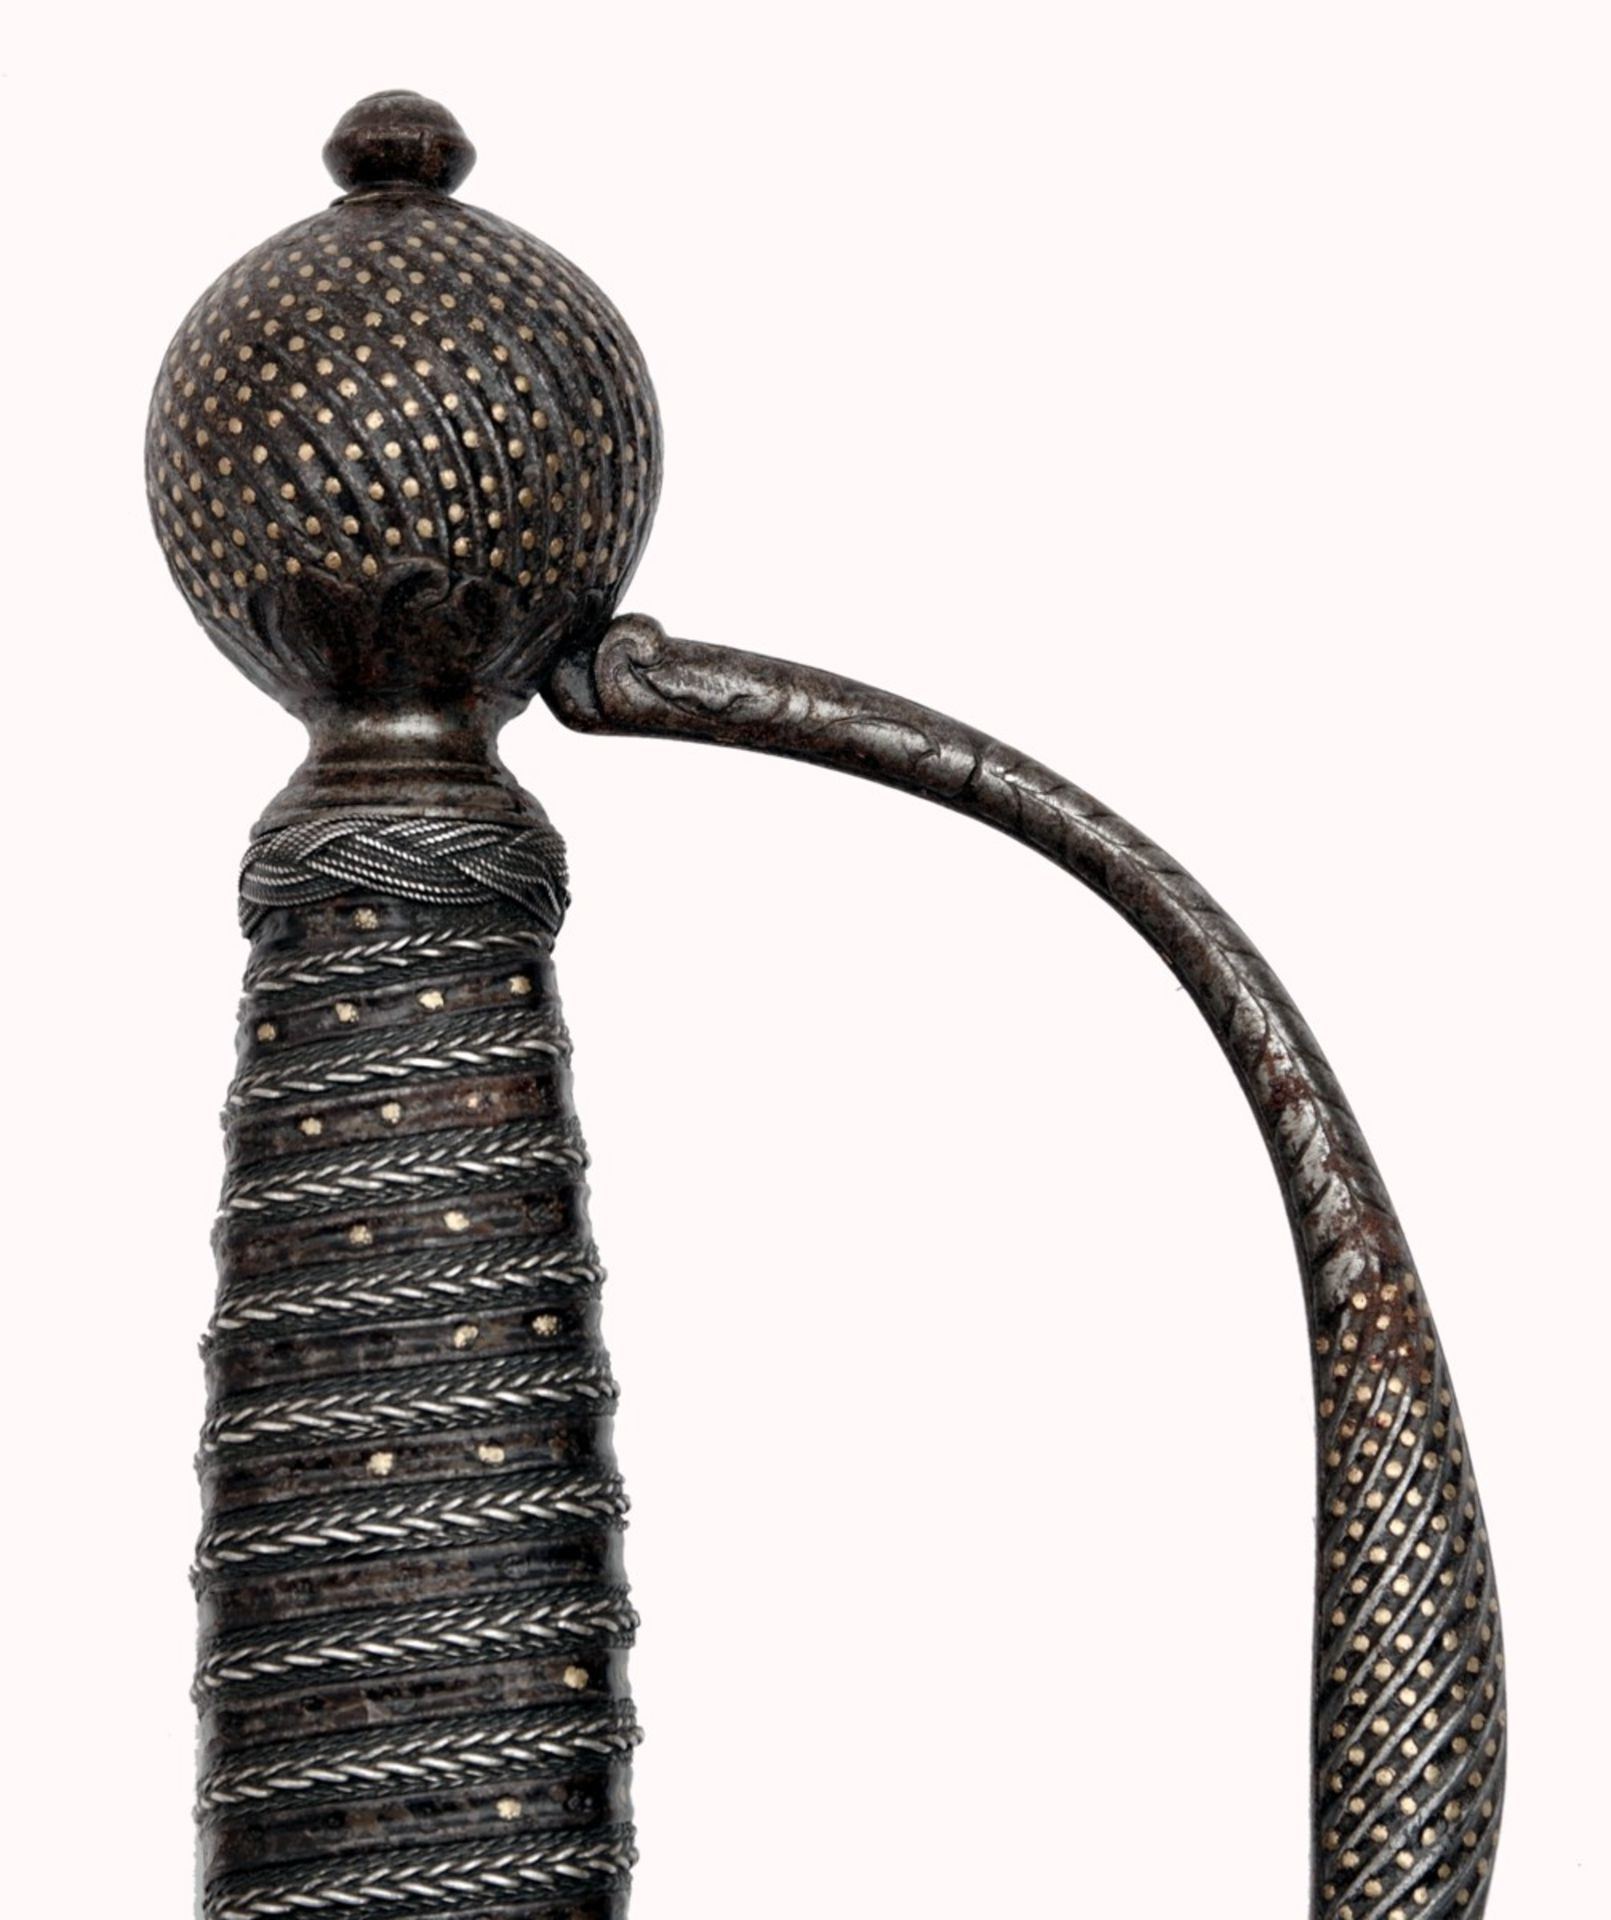 Small-Sword with Chiselled Hilt - Image 7 of 7